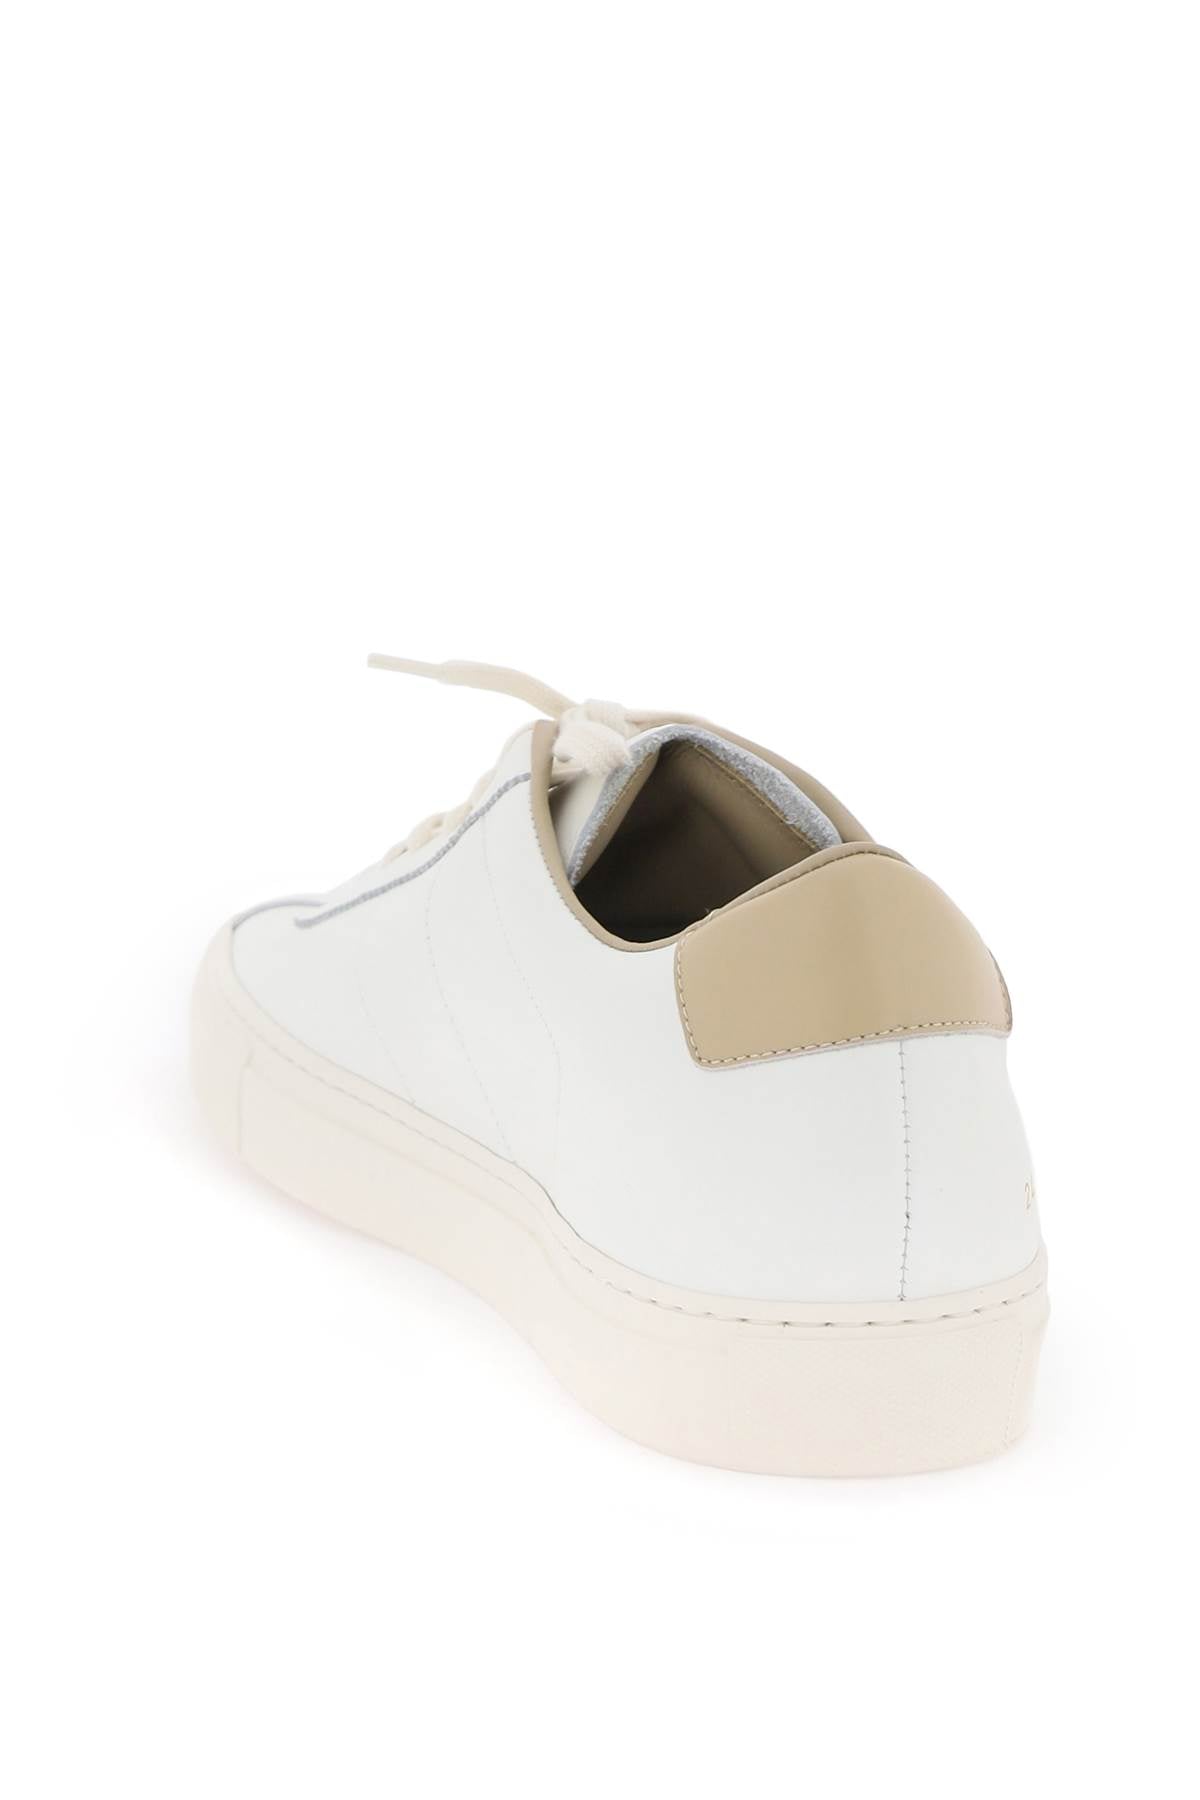 Common projects 70's tennis sneaker-2